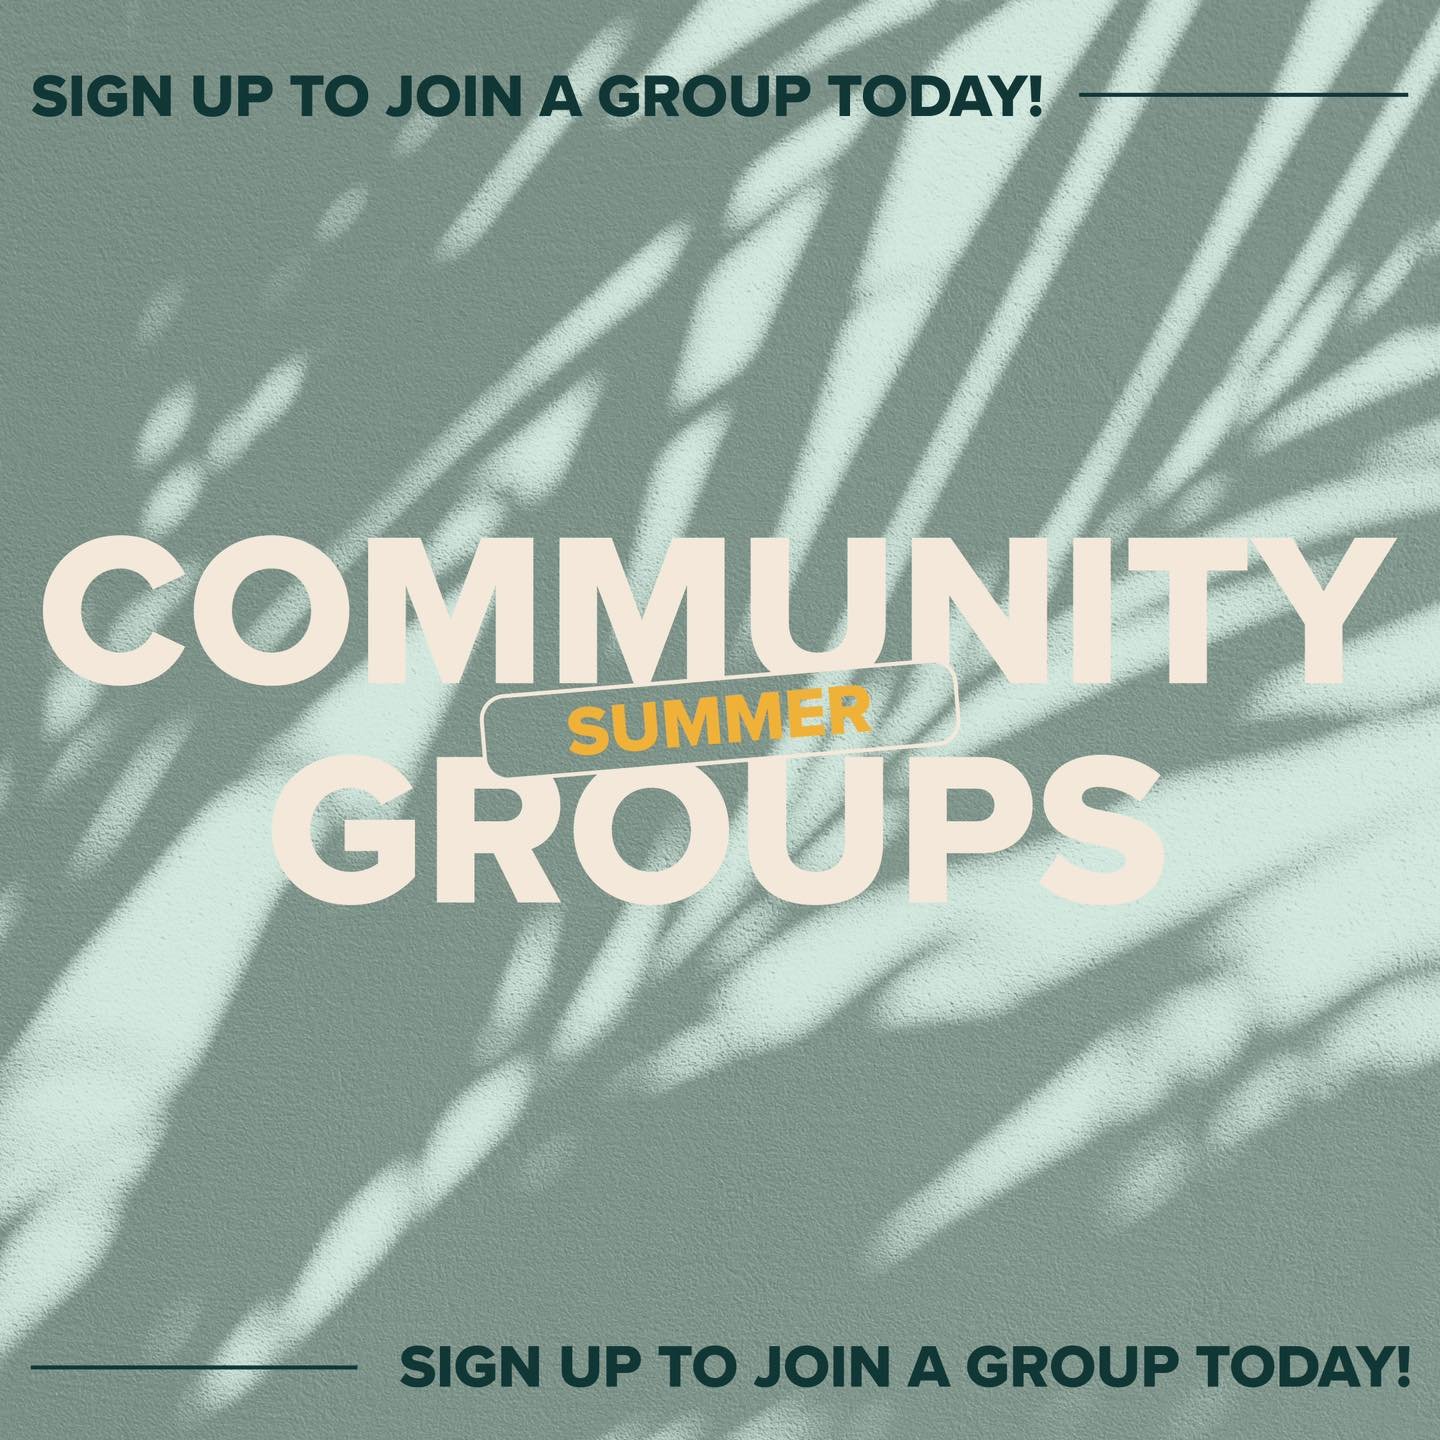 We have an awesome selection of community groups to choose from this summer, please sign up for fellowship and shared interests! 
Pop-up groups are a great way to connect with your Church family when you don't have time to join a Community Group that